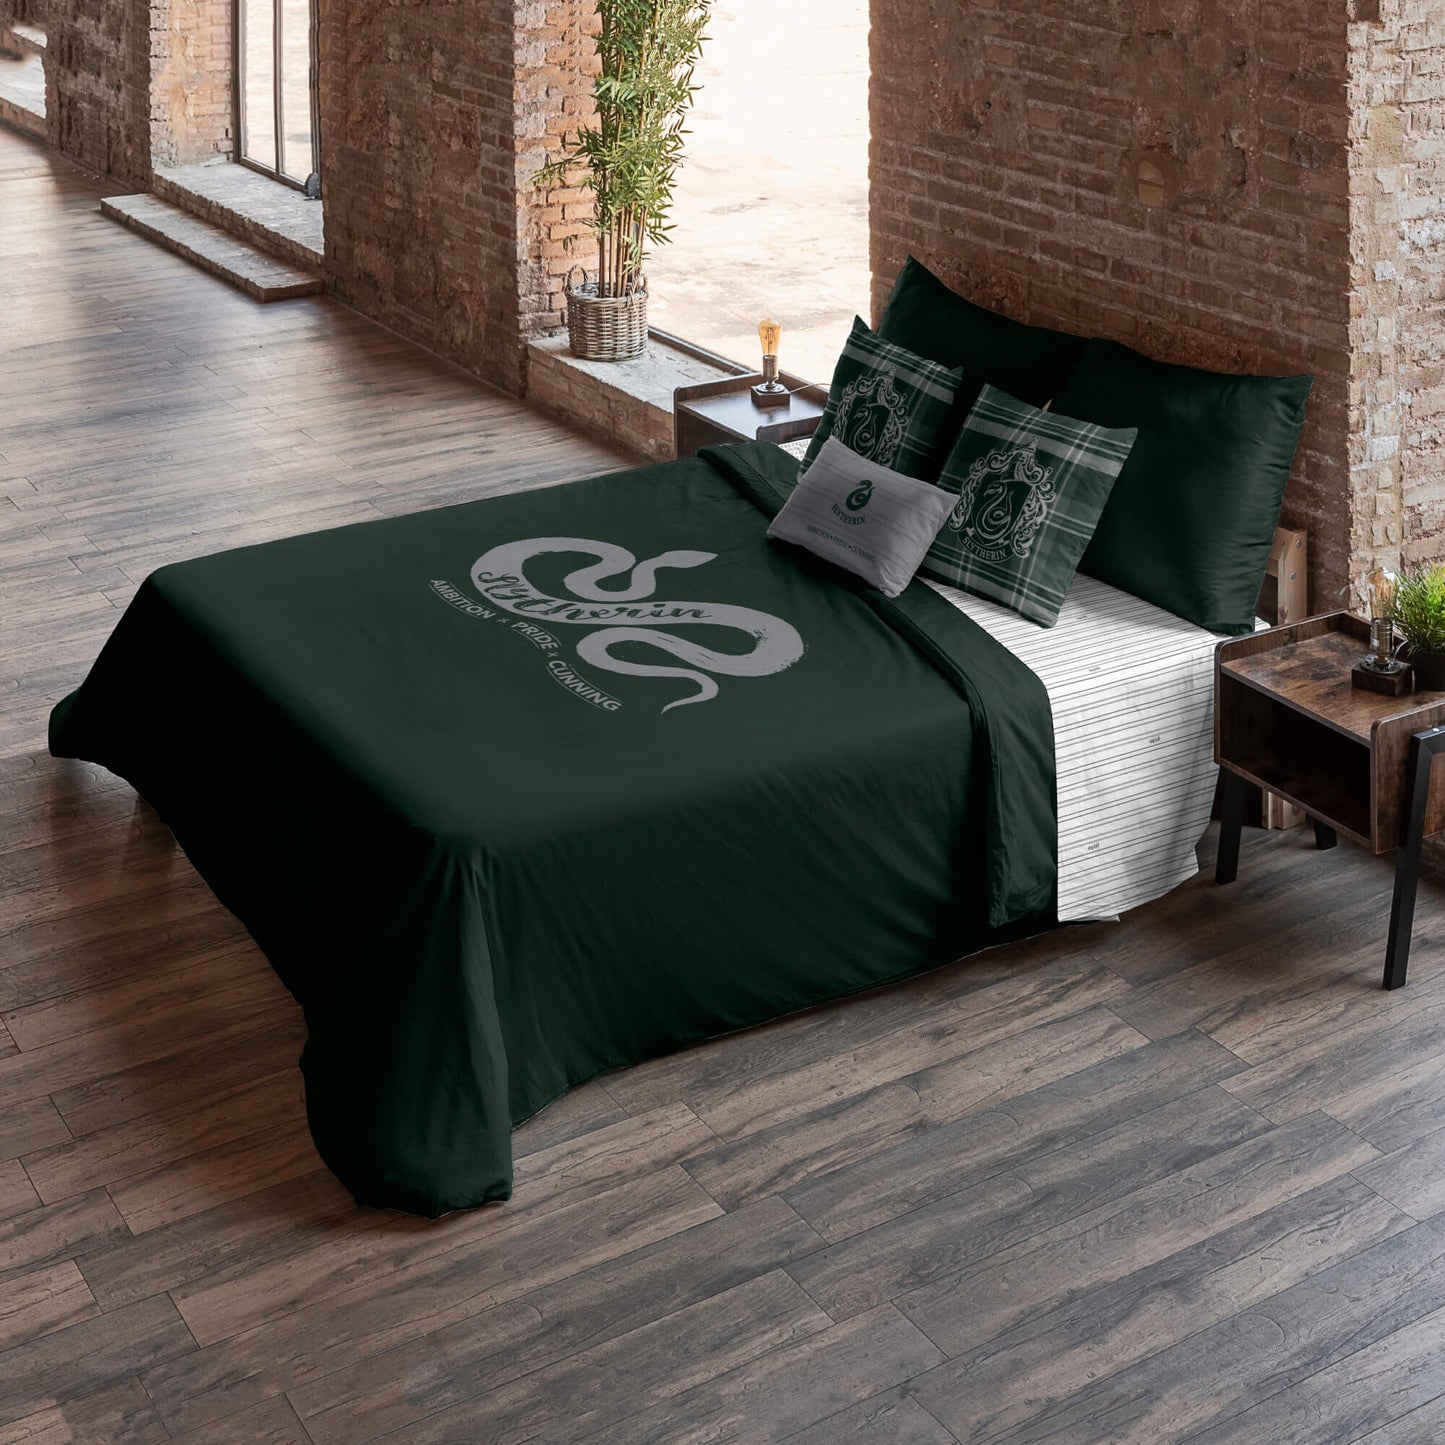 100% cotton duvet cover Slytherin Values